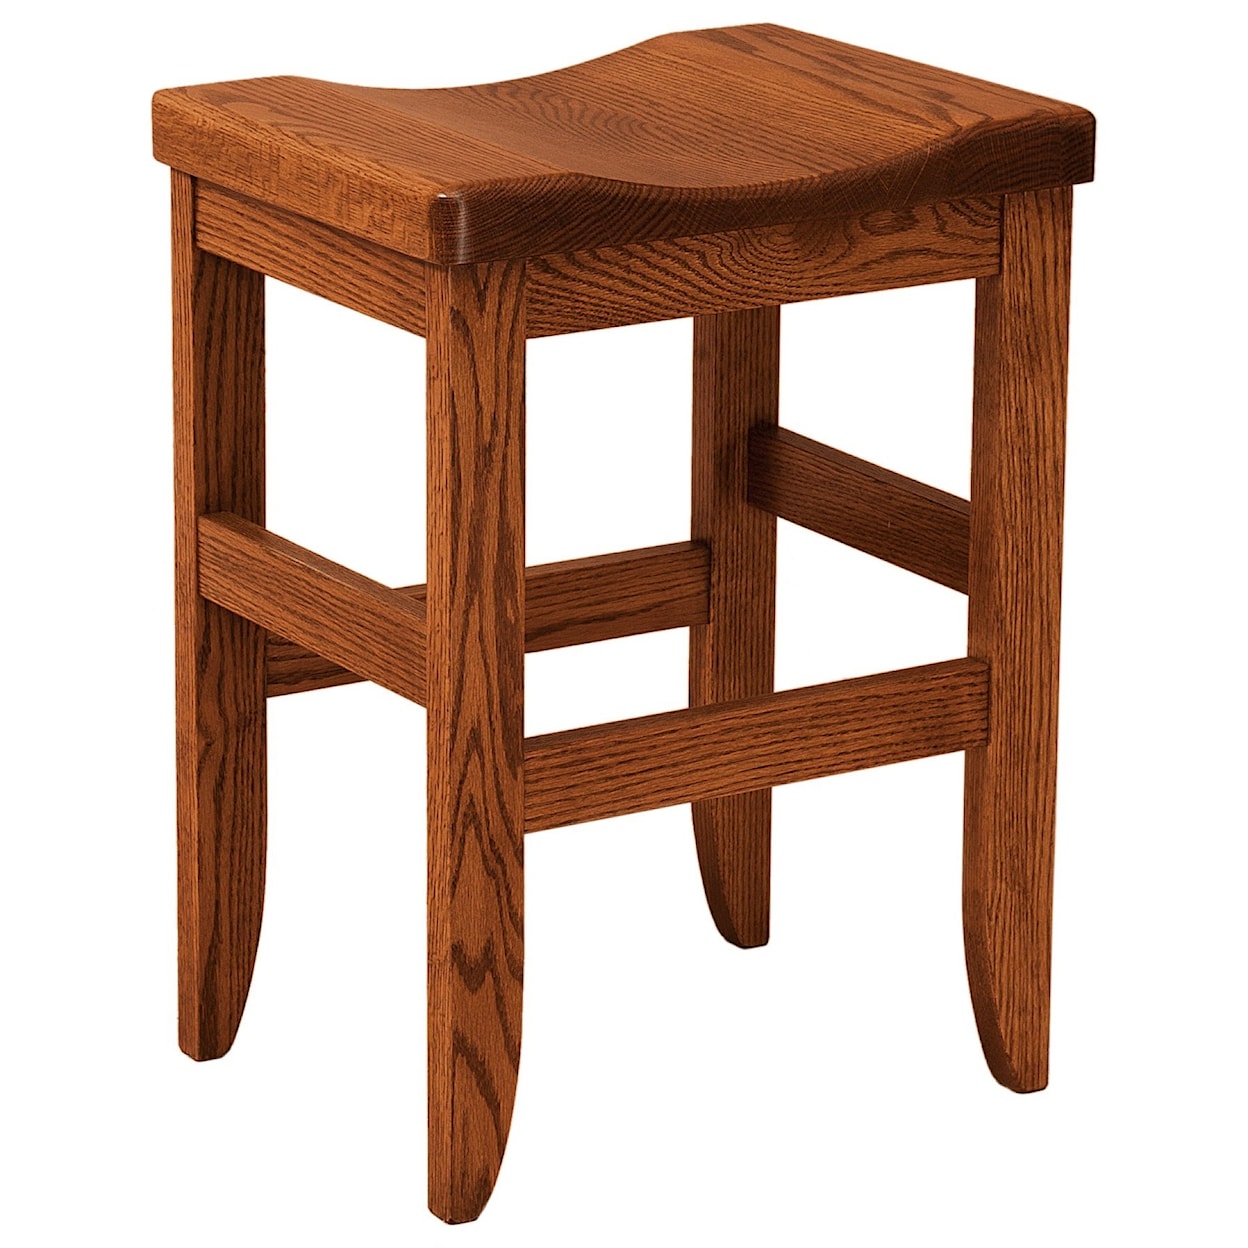 F&N Woodworking Clifton Bar Stool 30" Height - Wood Seat